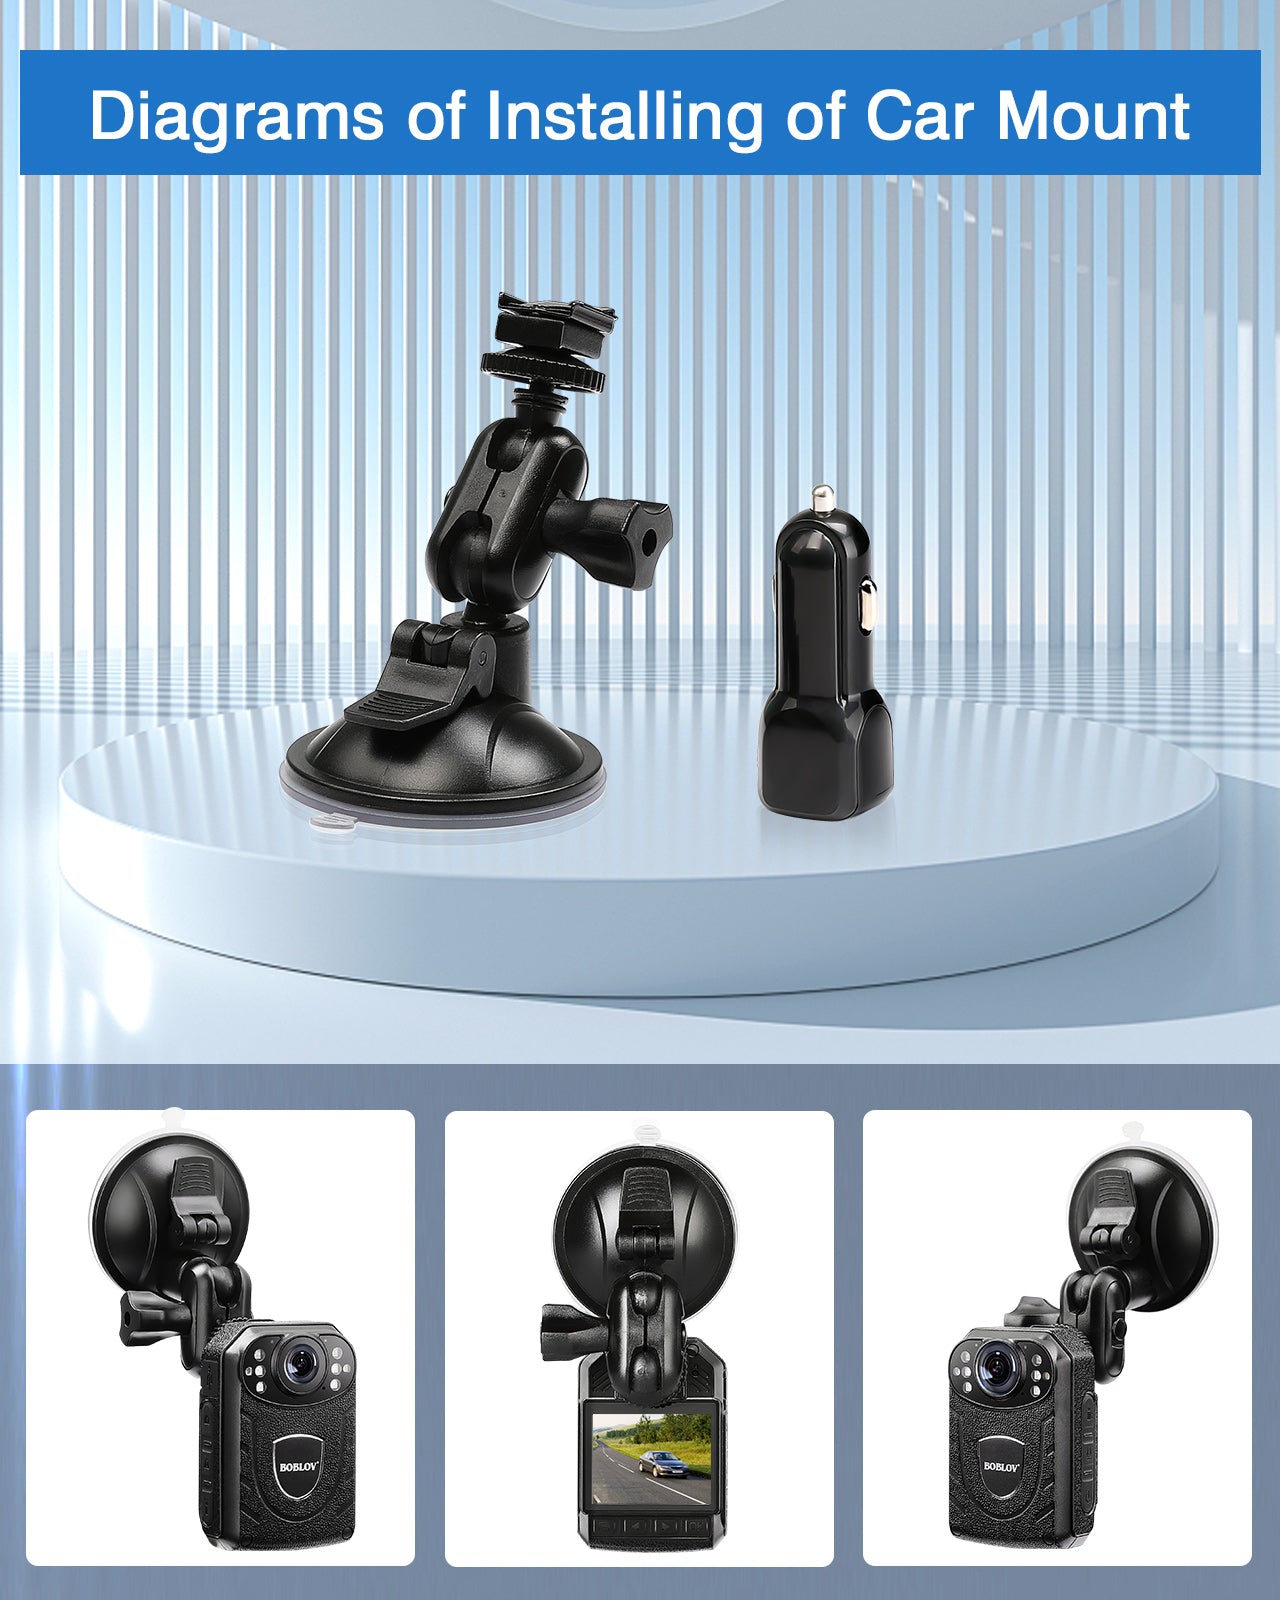 BOBLOV Car Suction Cup for KJ21 Body Camera, Car Mount and a Car Charger ONLY for KJ21 Body Camera, for Dash Car Mode, Dash Camera Accessories for KJ21 Body Camera(NOT Suitable for other models)